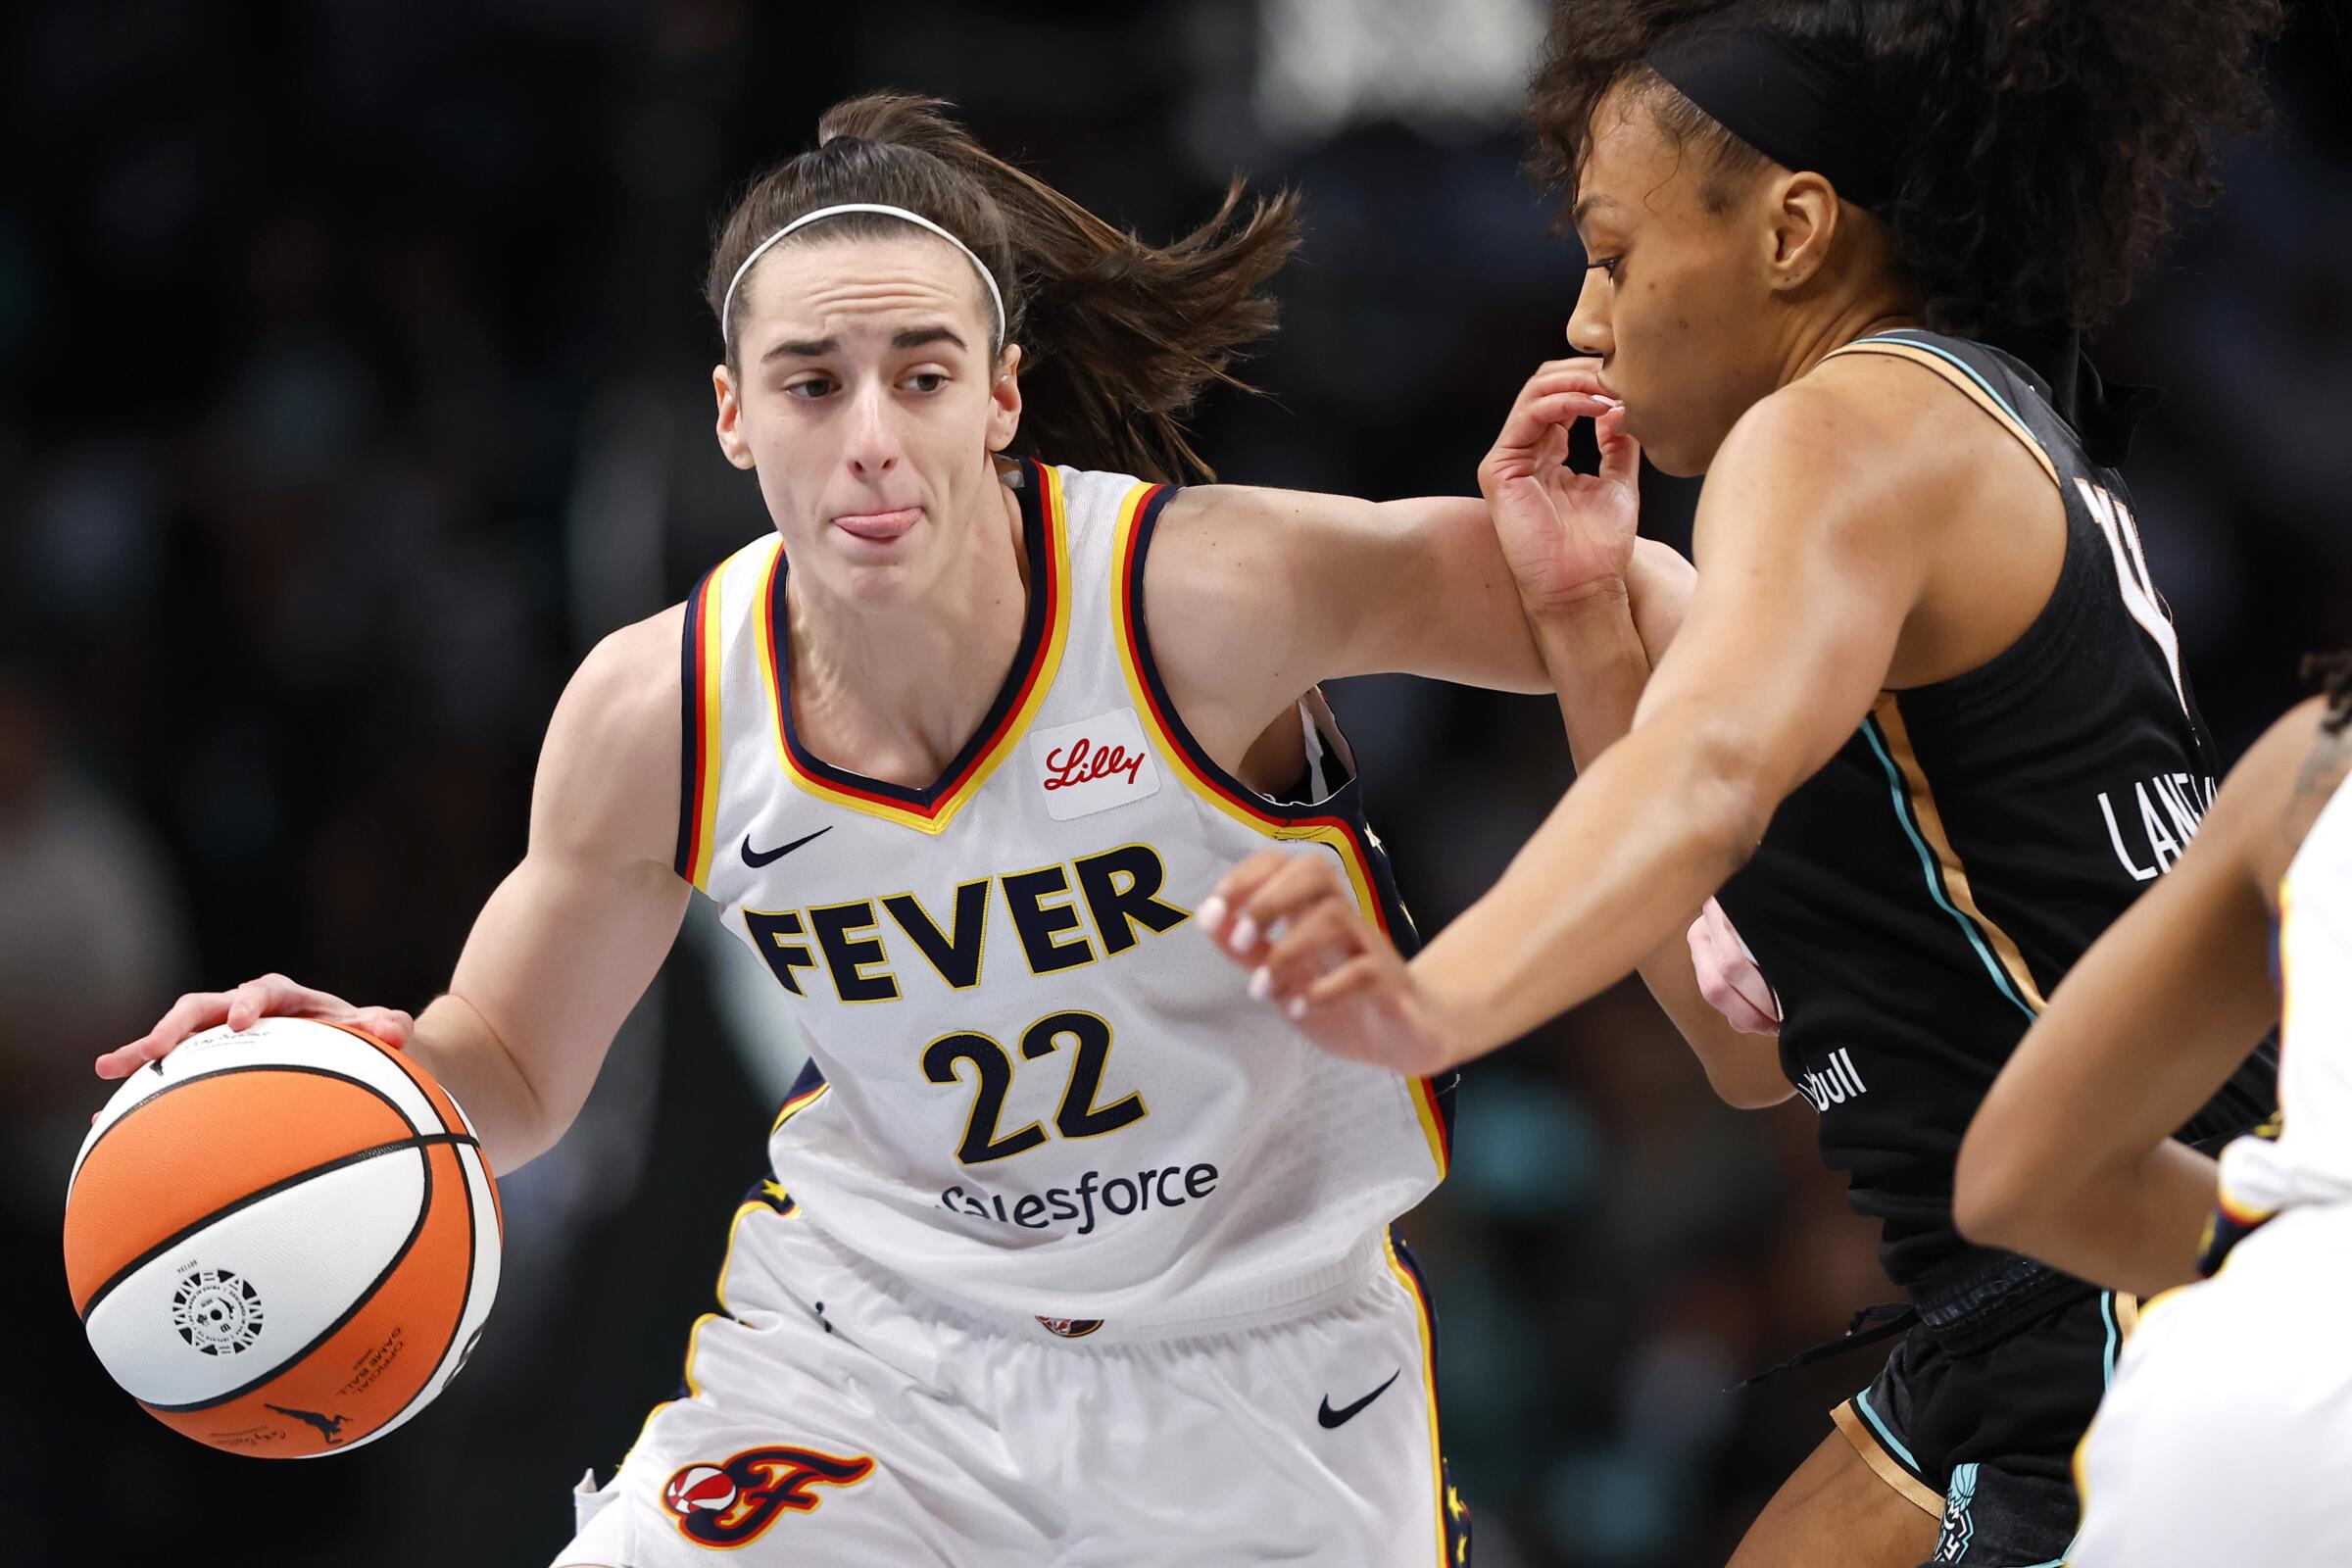 Indiana Fever rookie guard Caitlin Clark drives to the basket in front of New York Liberty forward Betnijah Laney-Hamilton.